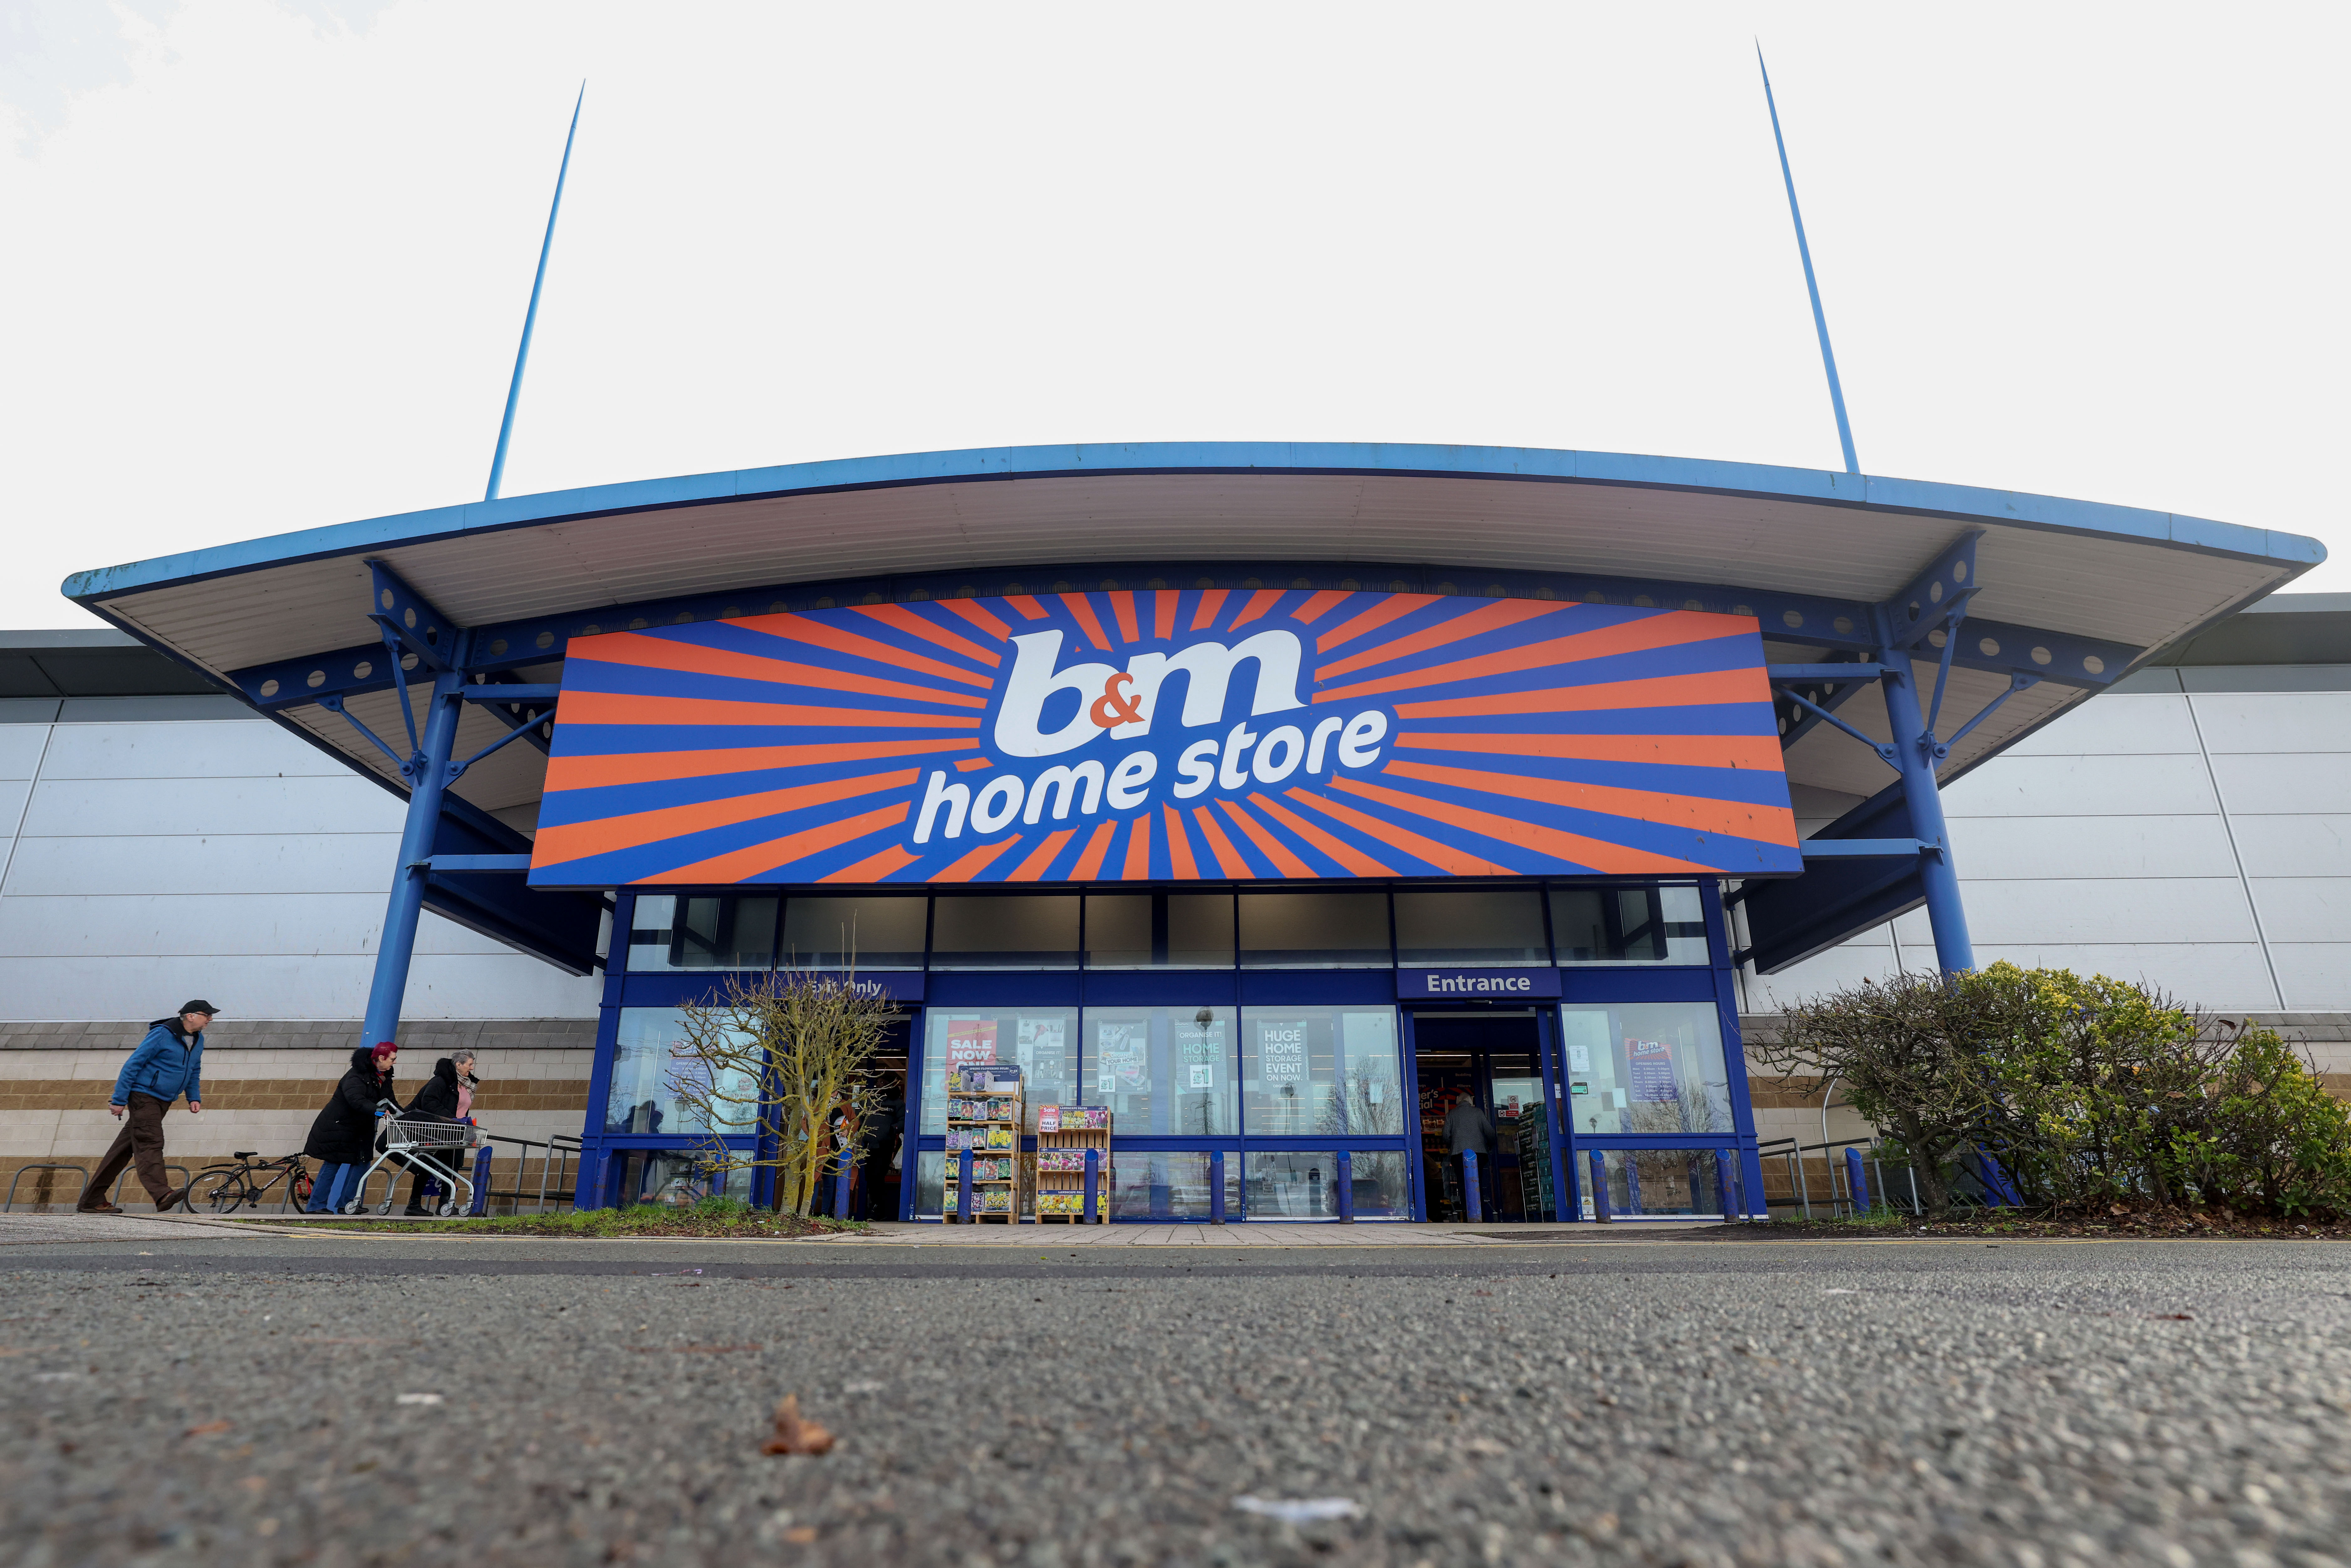 A massive bargain was spotted in home store B&M